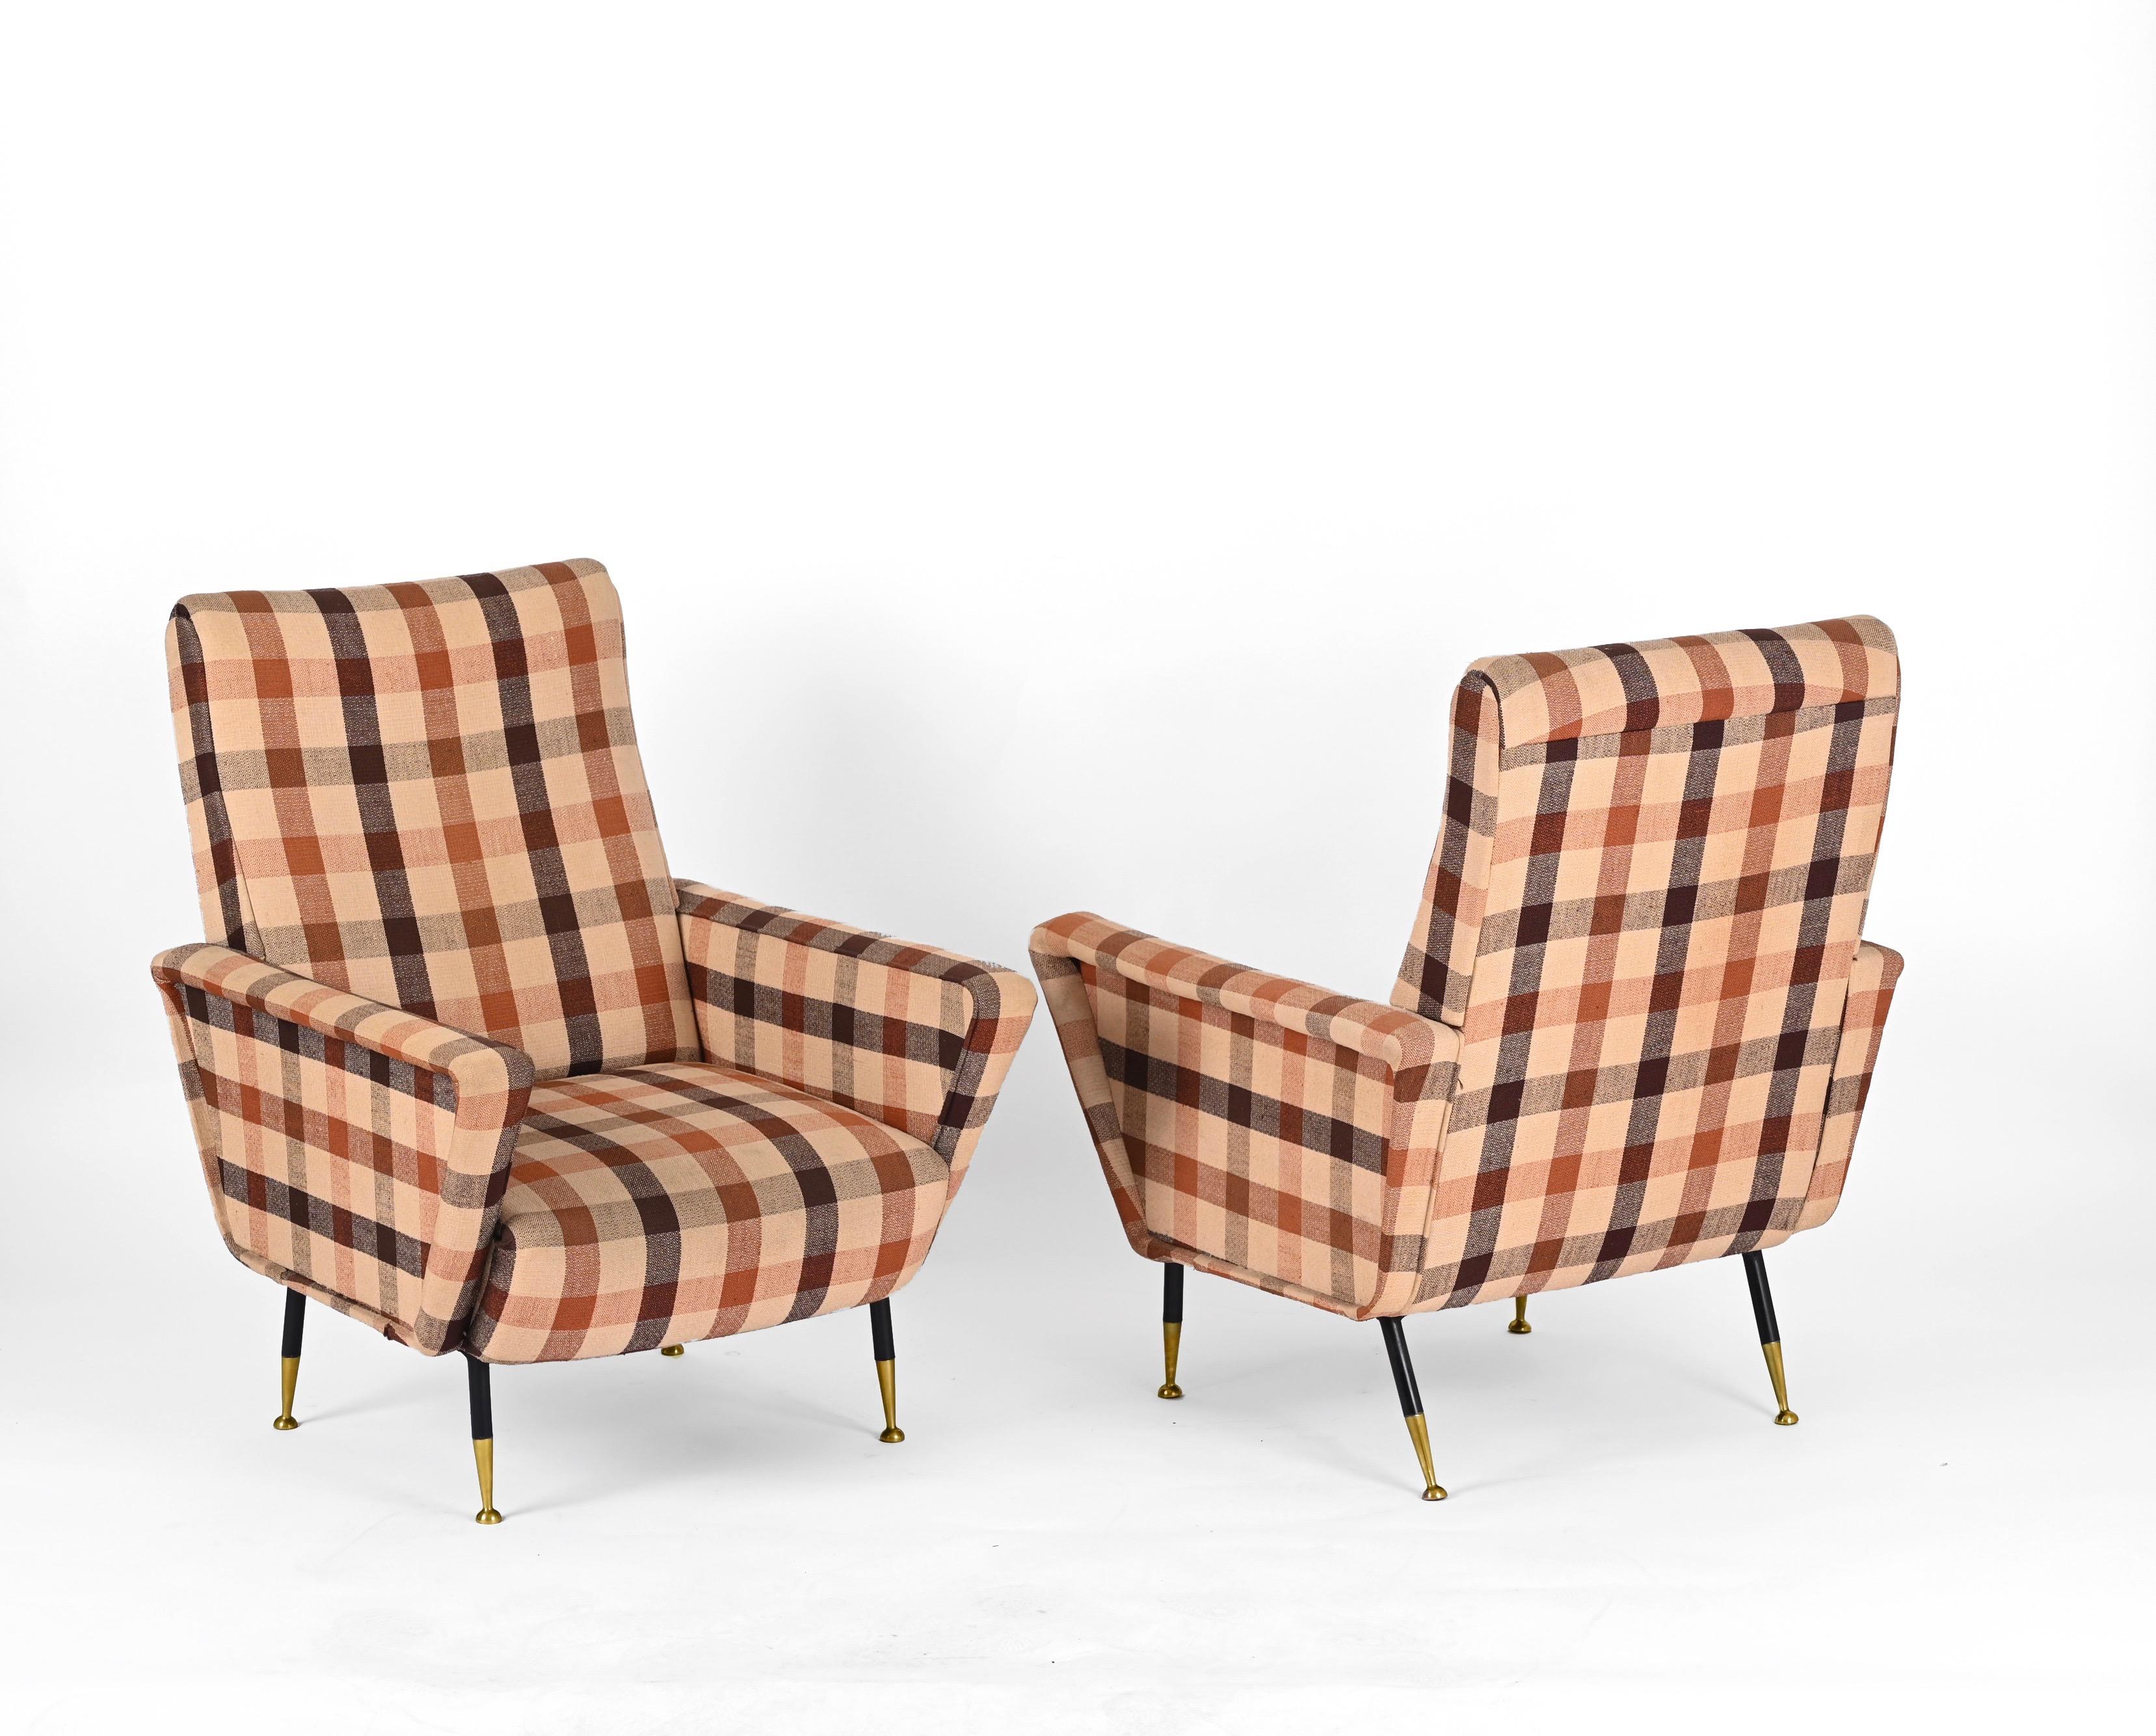 Marco Zanuso Pair of Armchairs, Check Fabric, Brass and Metal, Italy 1950s For Sale 3